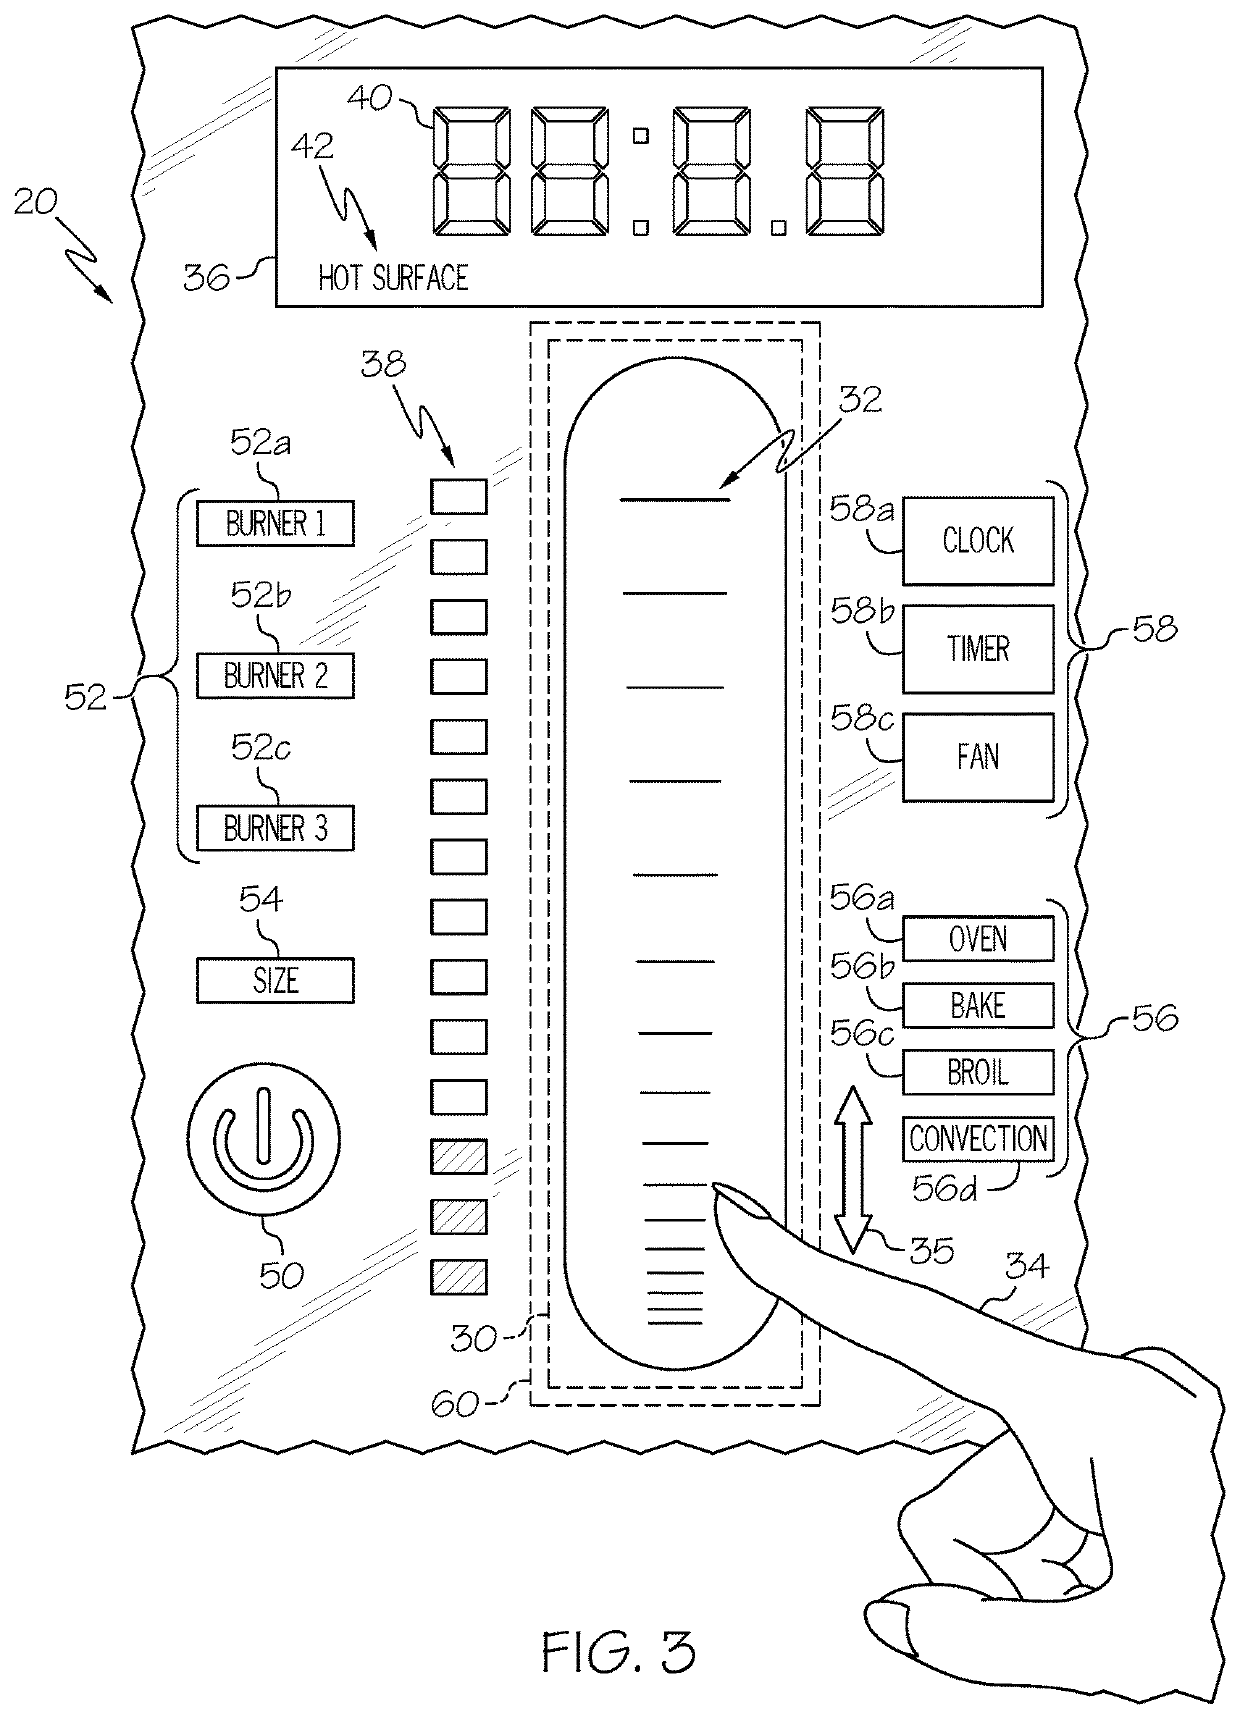 Appliance with electrovibration user feedback in a touch panel interface